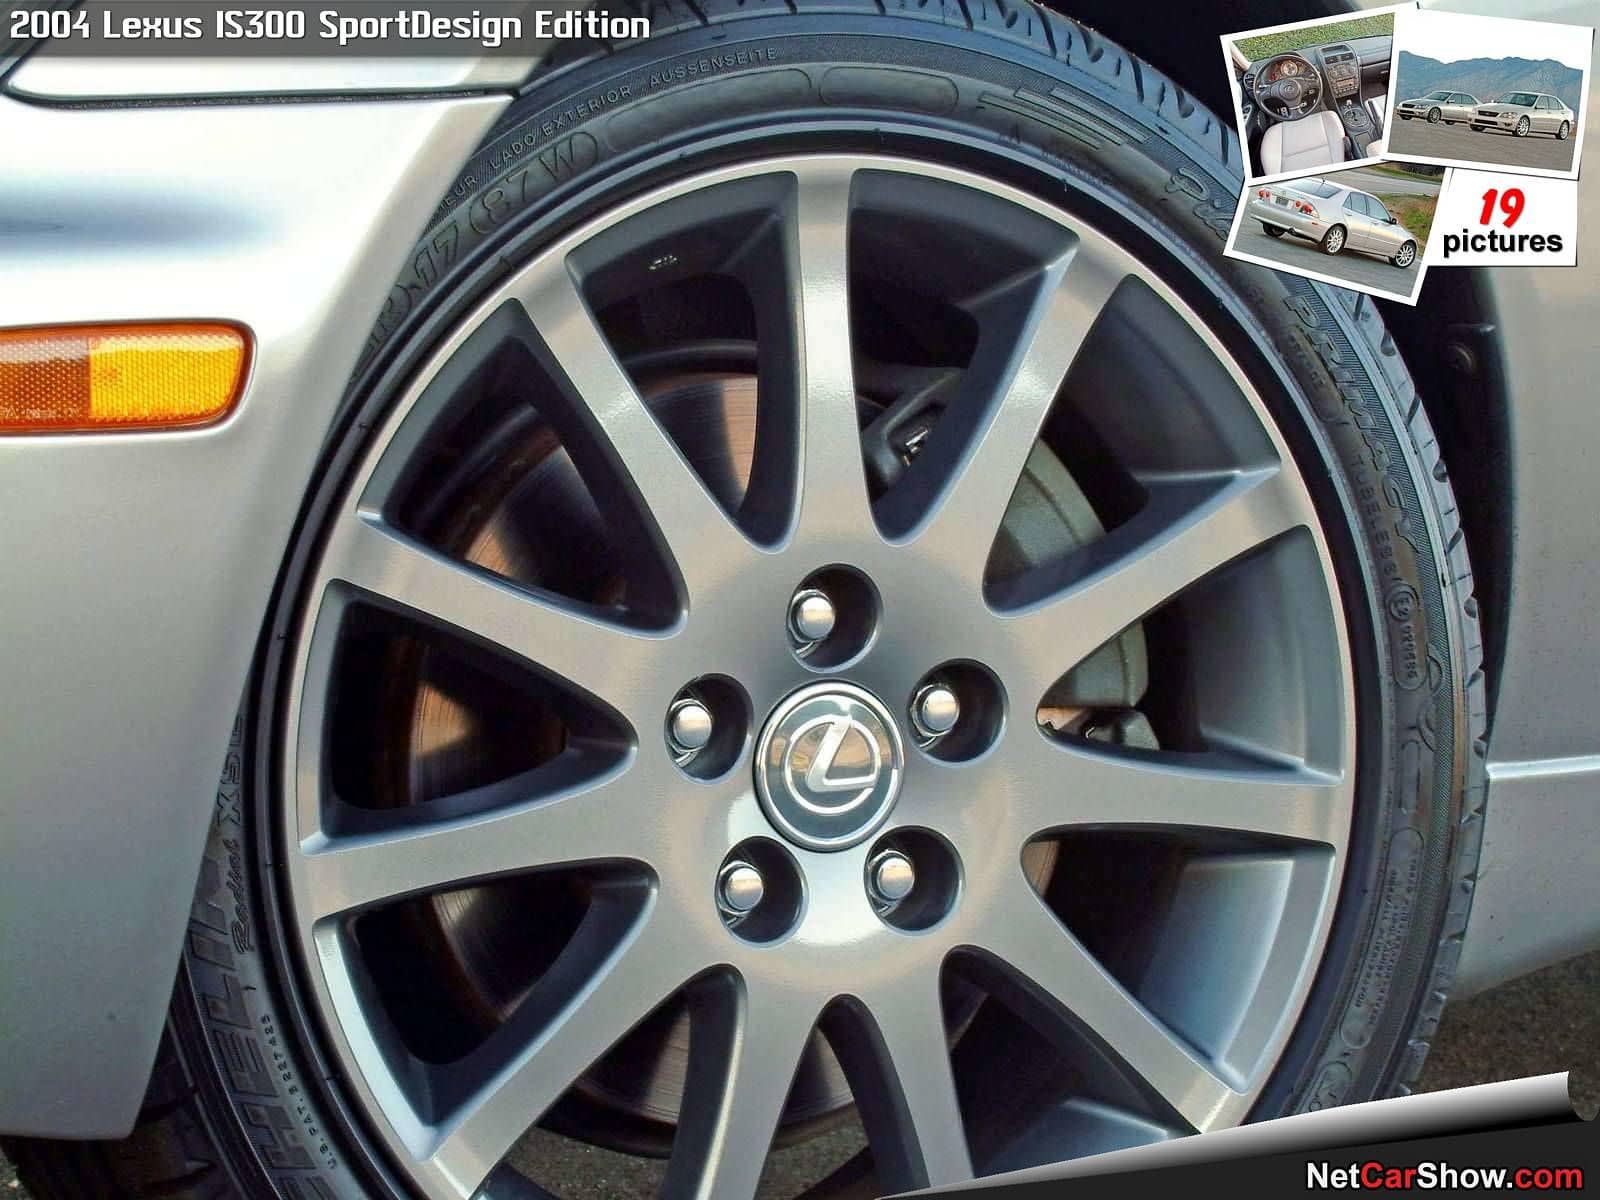 Wheels and Tires/Axles - WTB: Is300 SportDesign Wheels - Used - 2002 to 2005 Lexus IS300 - Mt. Prospect, IL 60016, United States